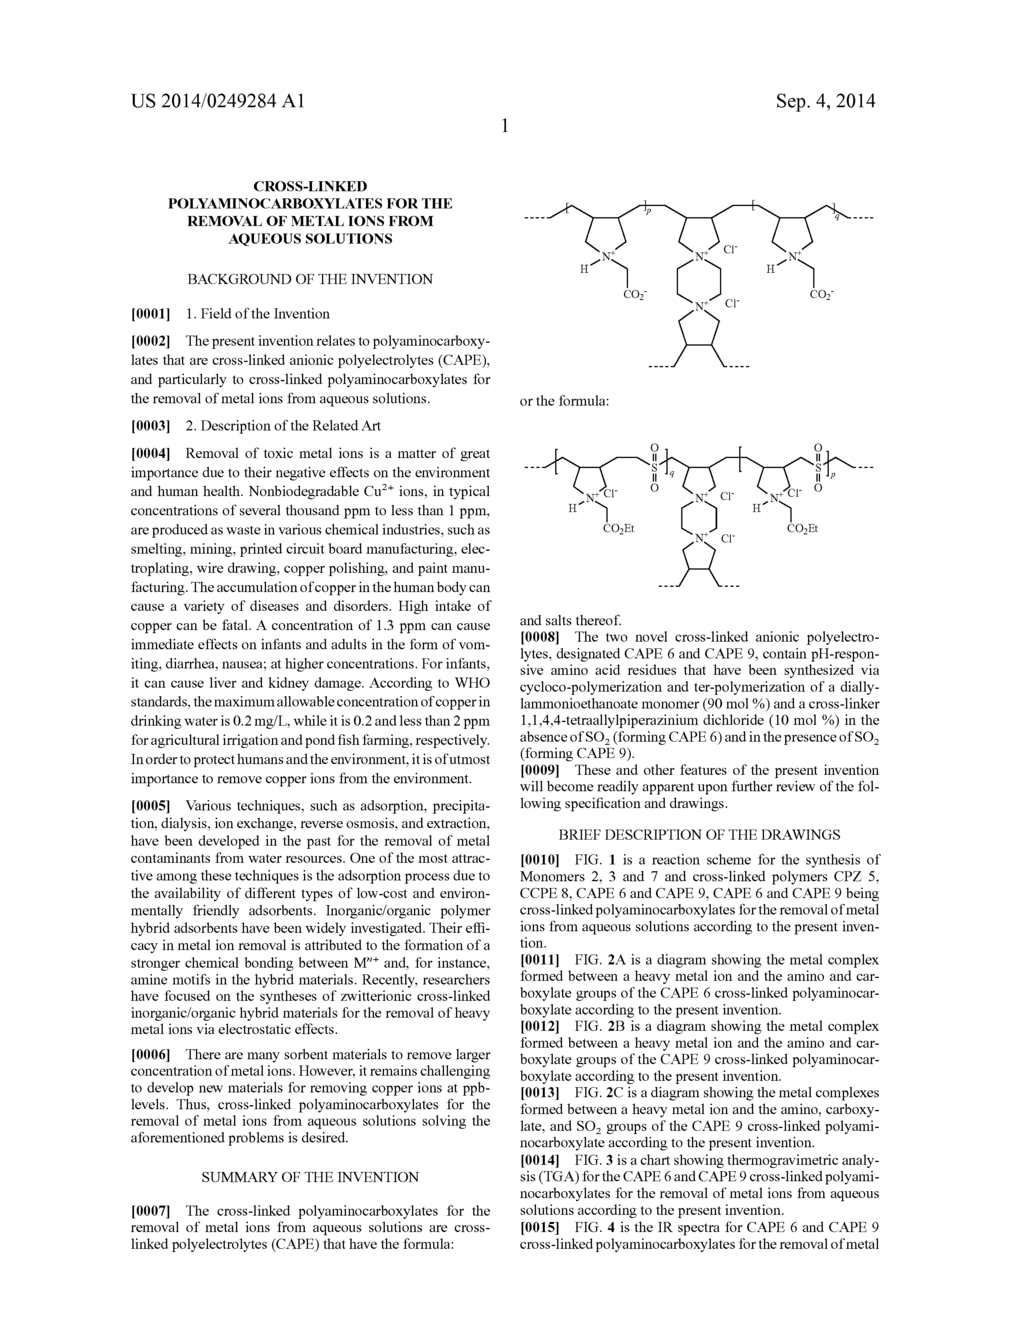 CROSS-LINKED POLYAMINOCARBOXYLATES FOR THE REMOVAL OF METAL IONS FROM     AQUEOUS SOLUTIONS - diagram, schematic, and image 28